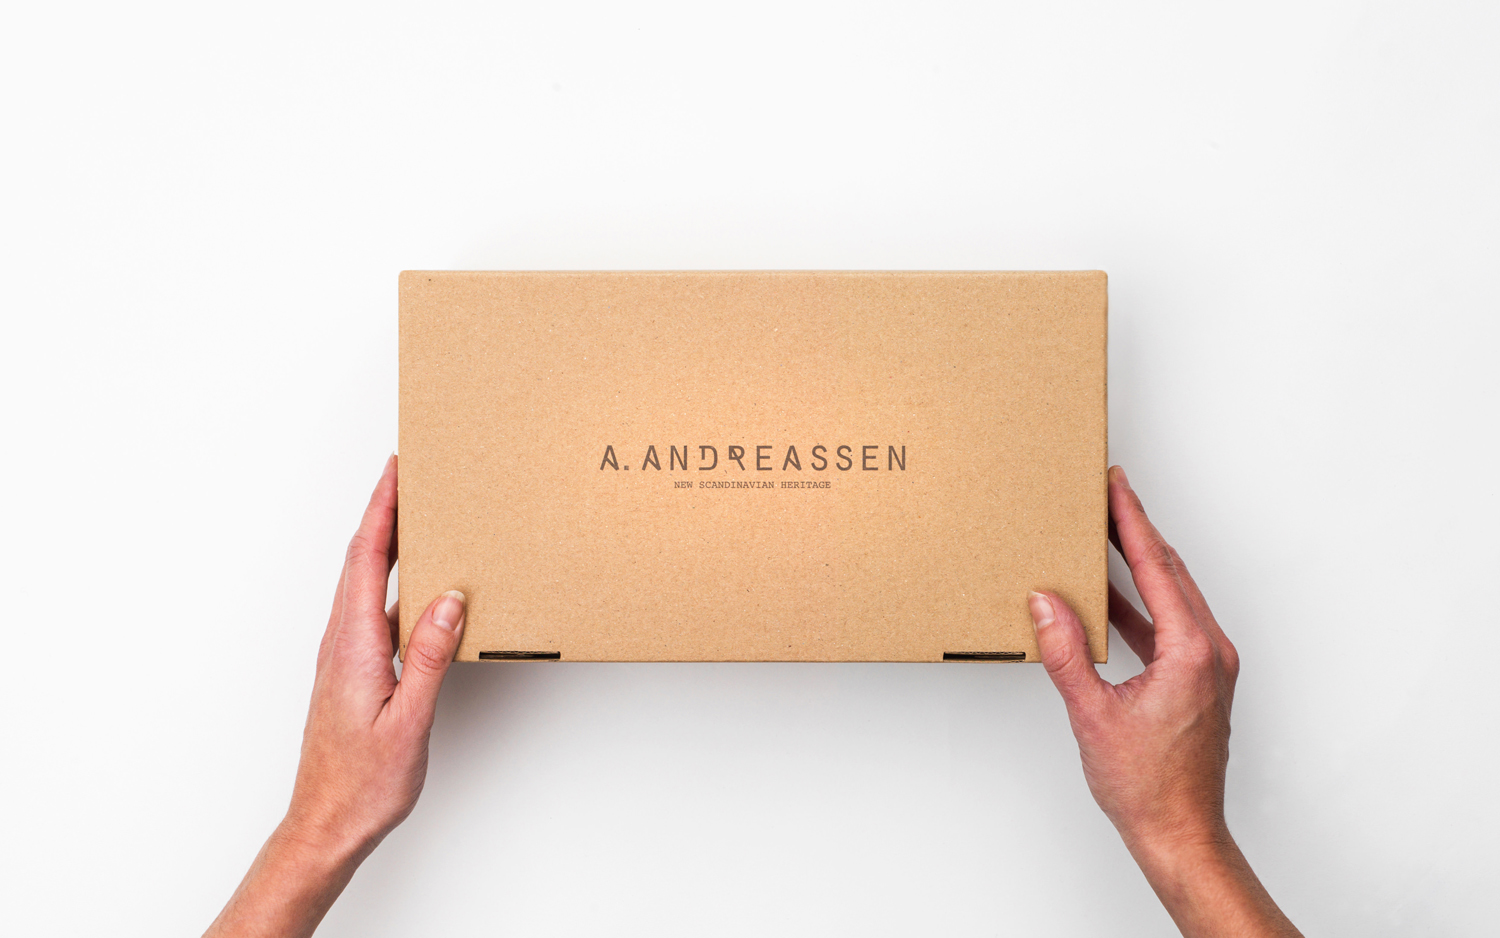 Brand identity and package design by London based Bond for new Scandinavian lifestyle brand A. Andreassen